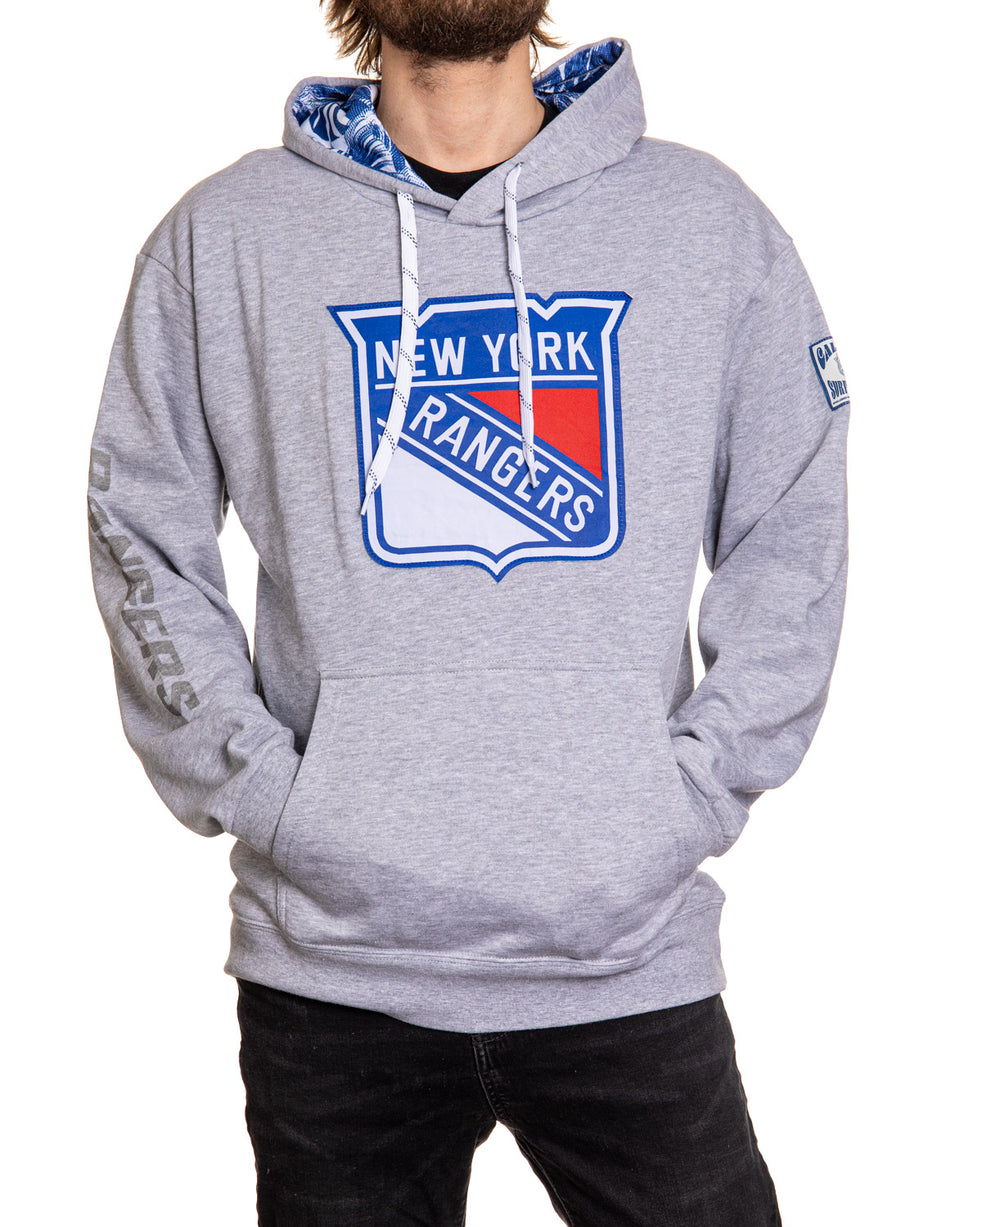 NHL New York Rangers Men's Long Sleeve Hooded Sweatshirt with Lace - S